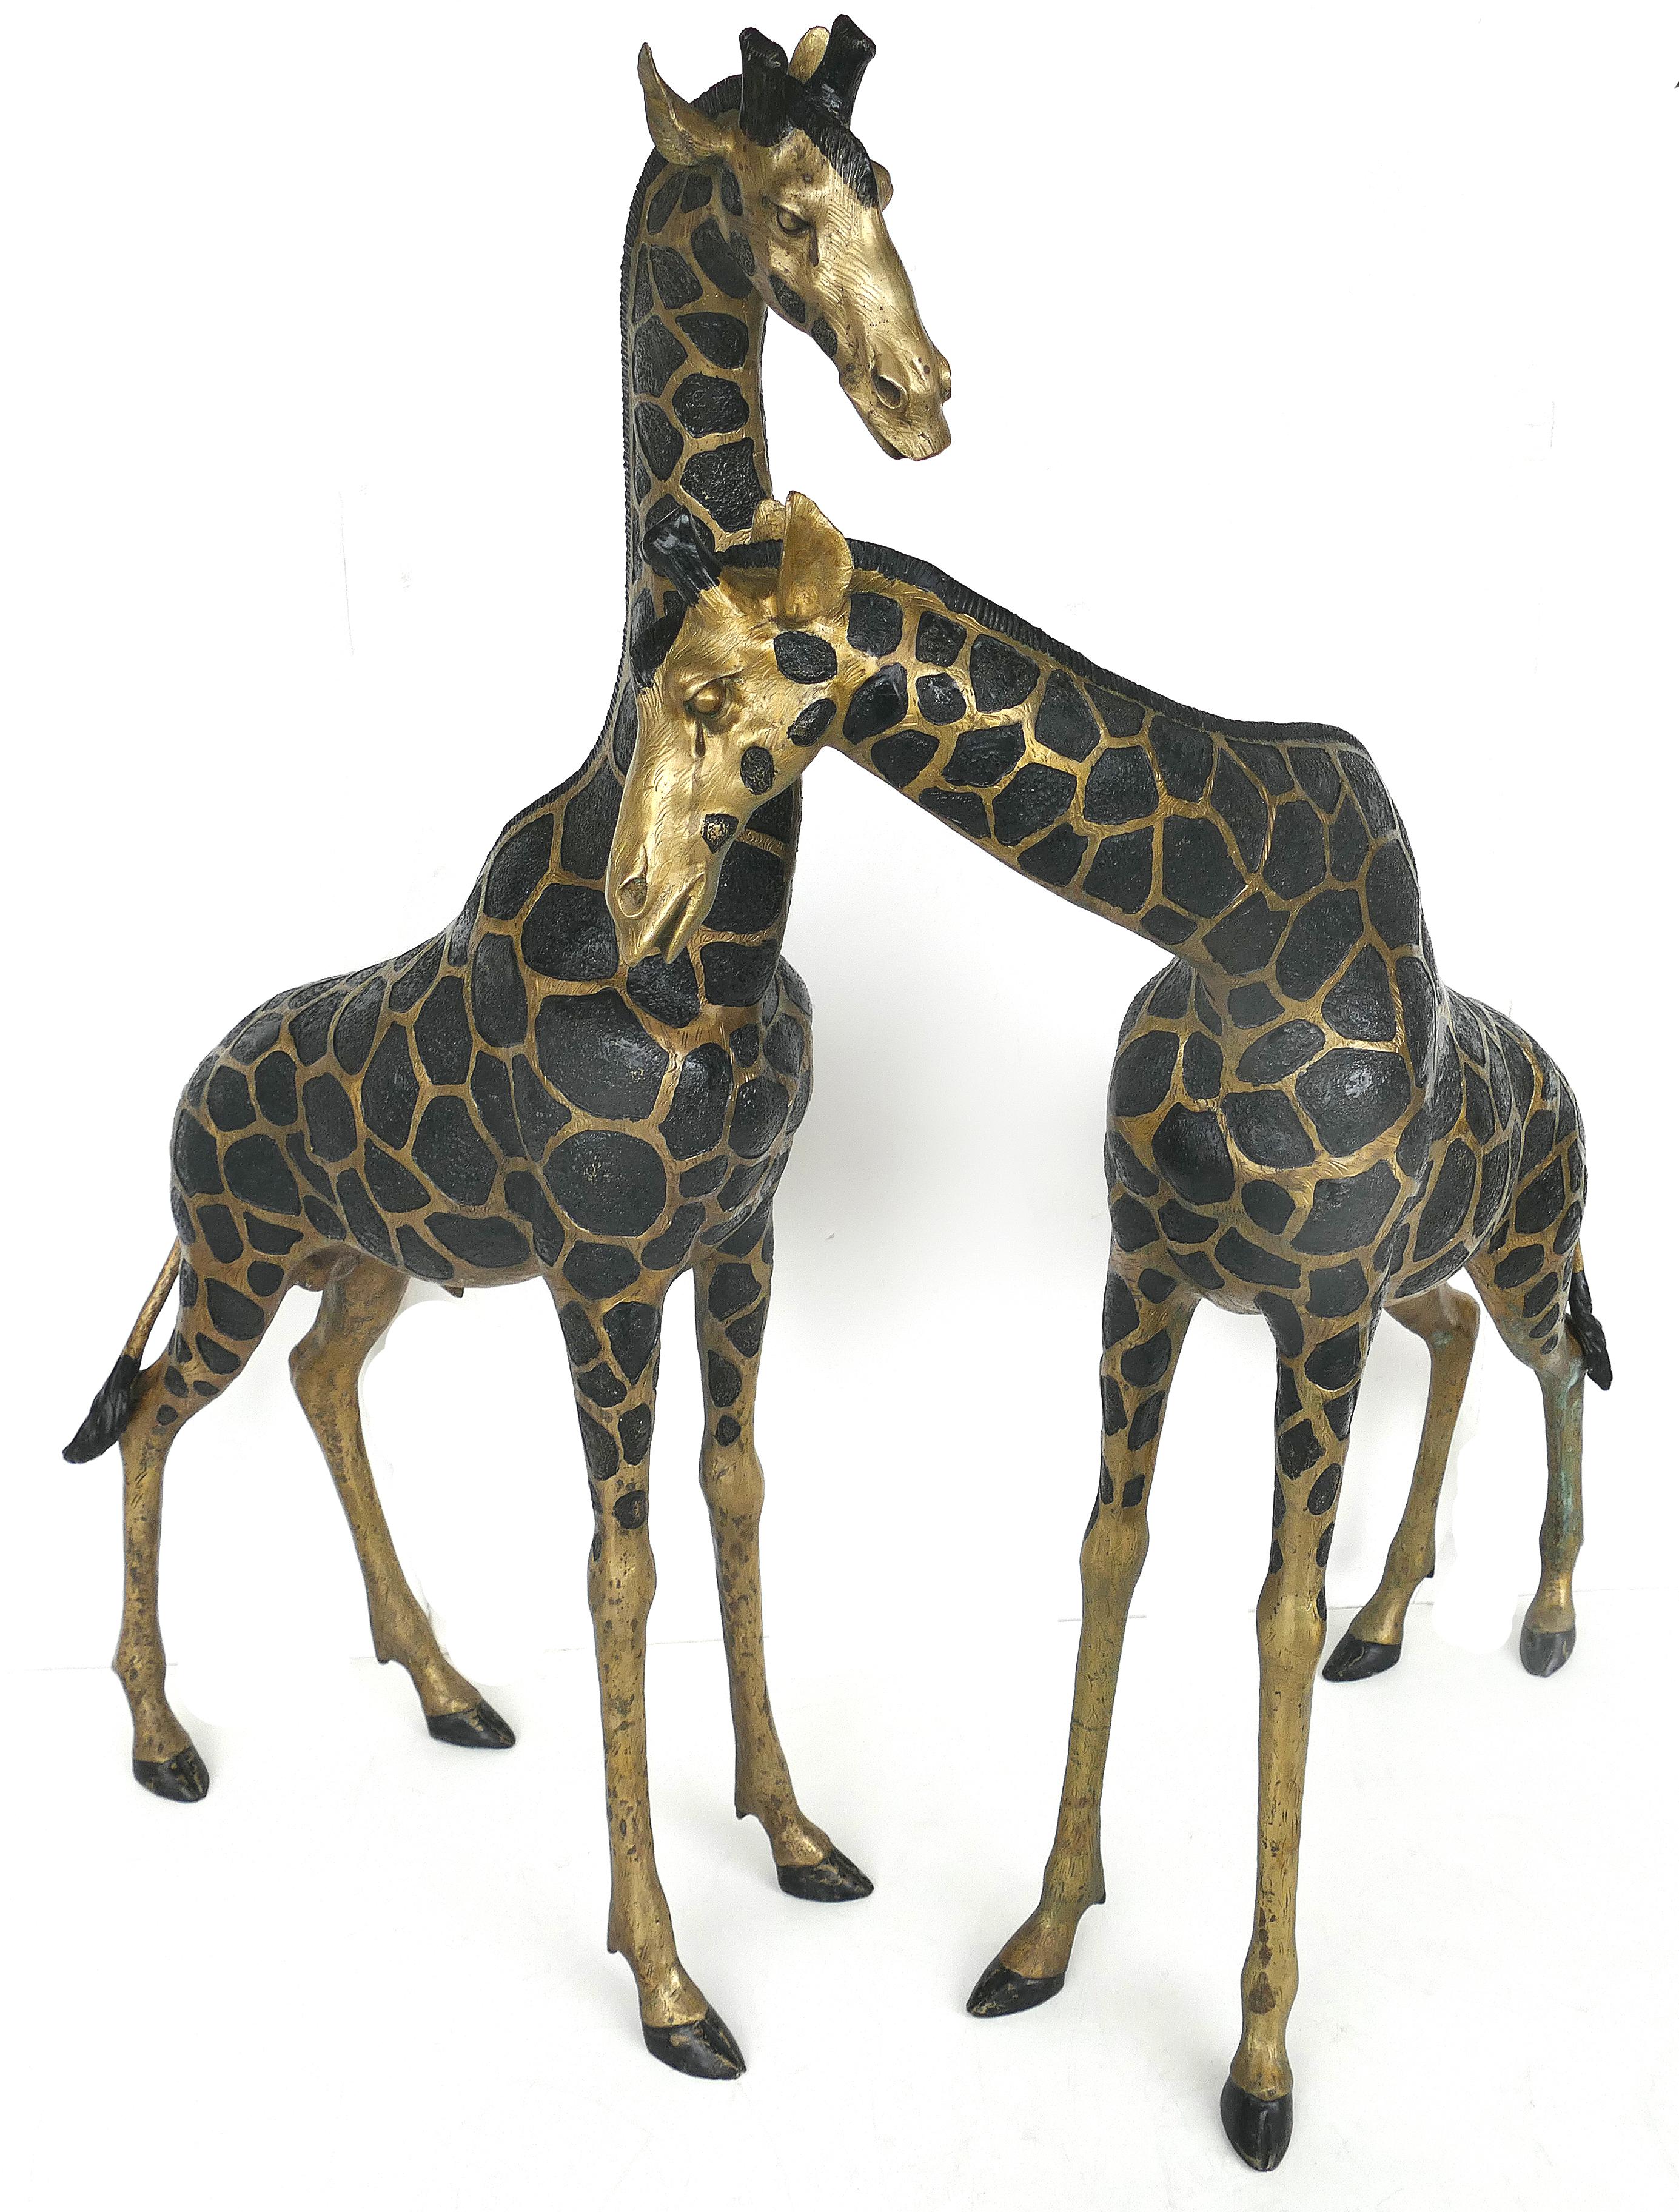 Overscale Hollywood Regency brass giraffe sculptures, pair

Offered for sale is a very large pair of Hollywood Regency brass giraffe sculptures. The pieces can be situated in various positions to create interesting and natural arrangements.
The